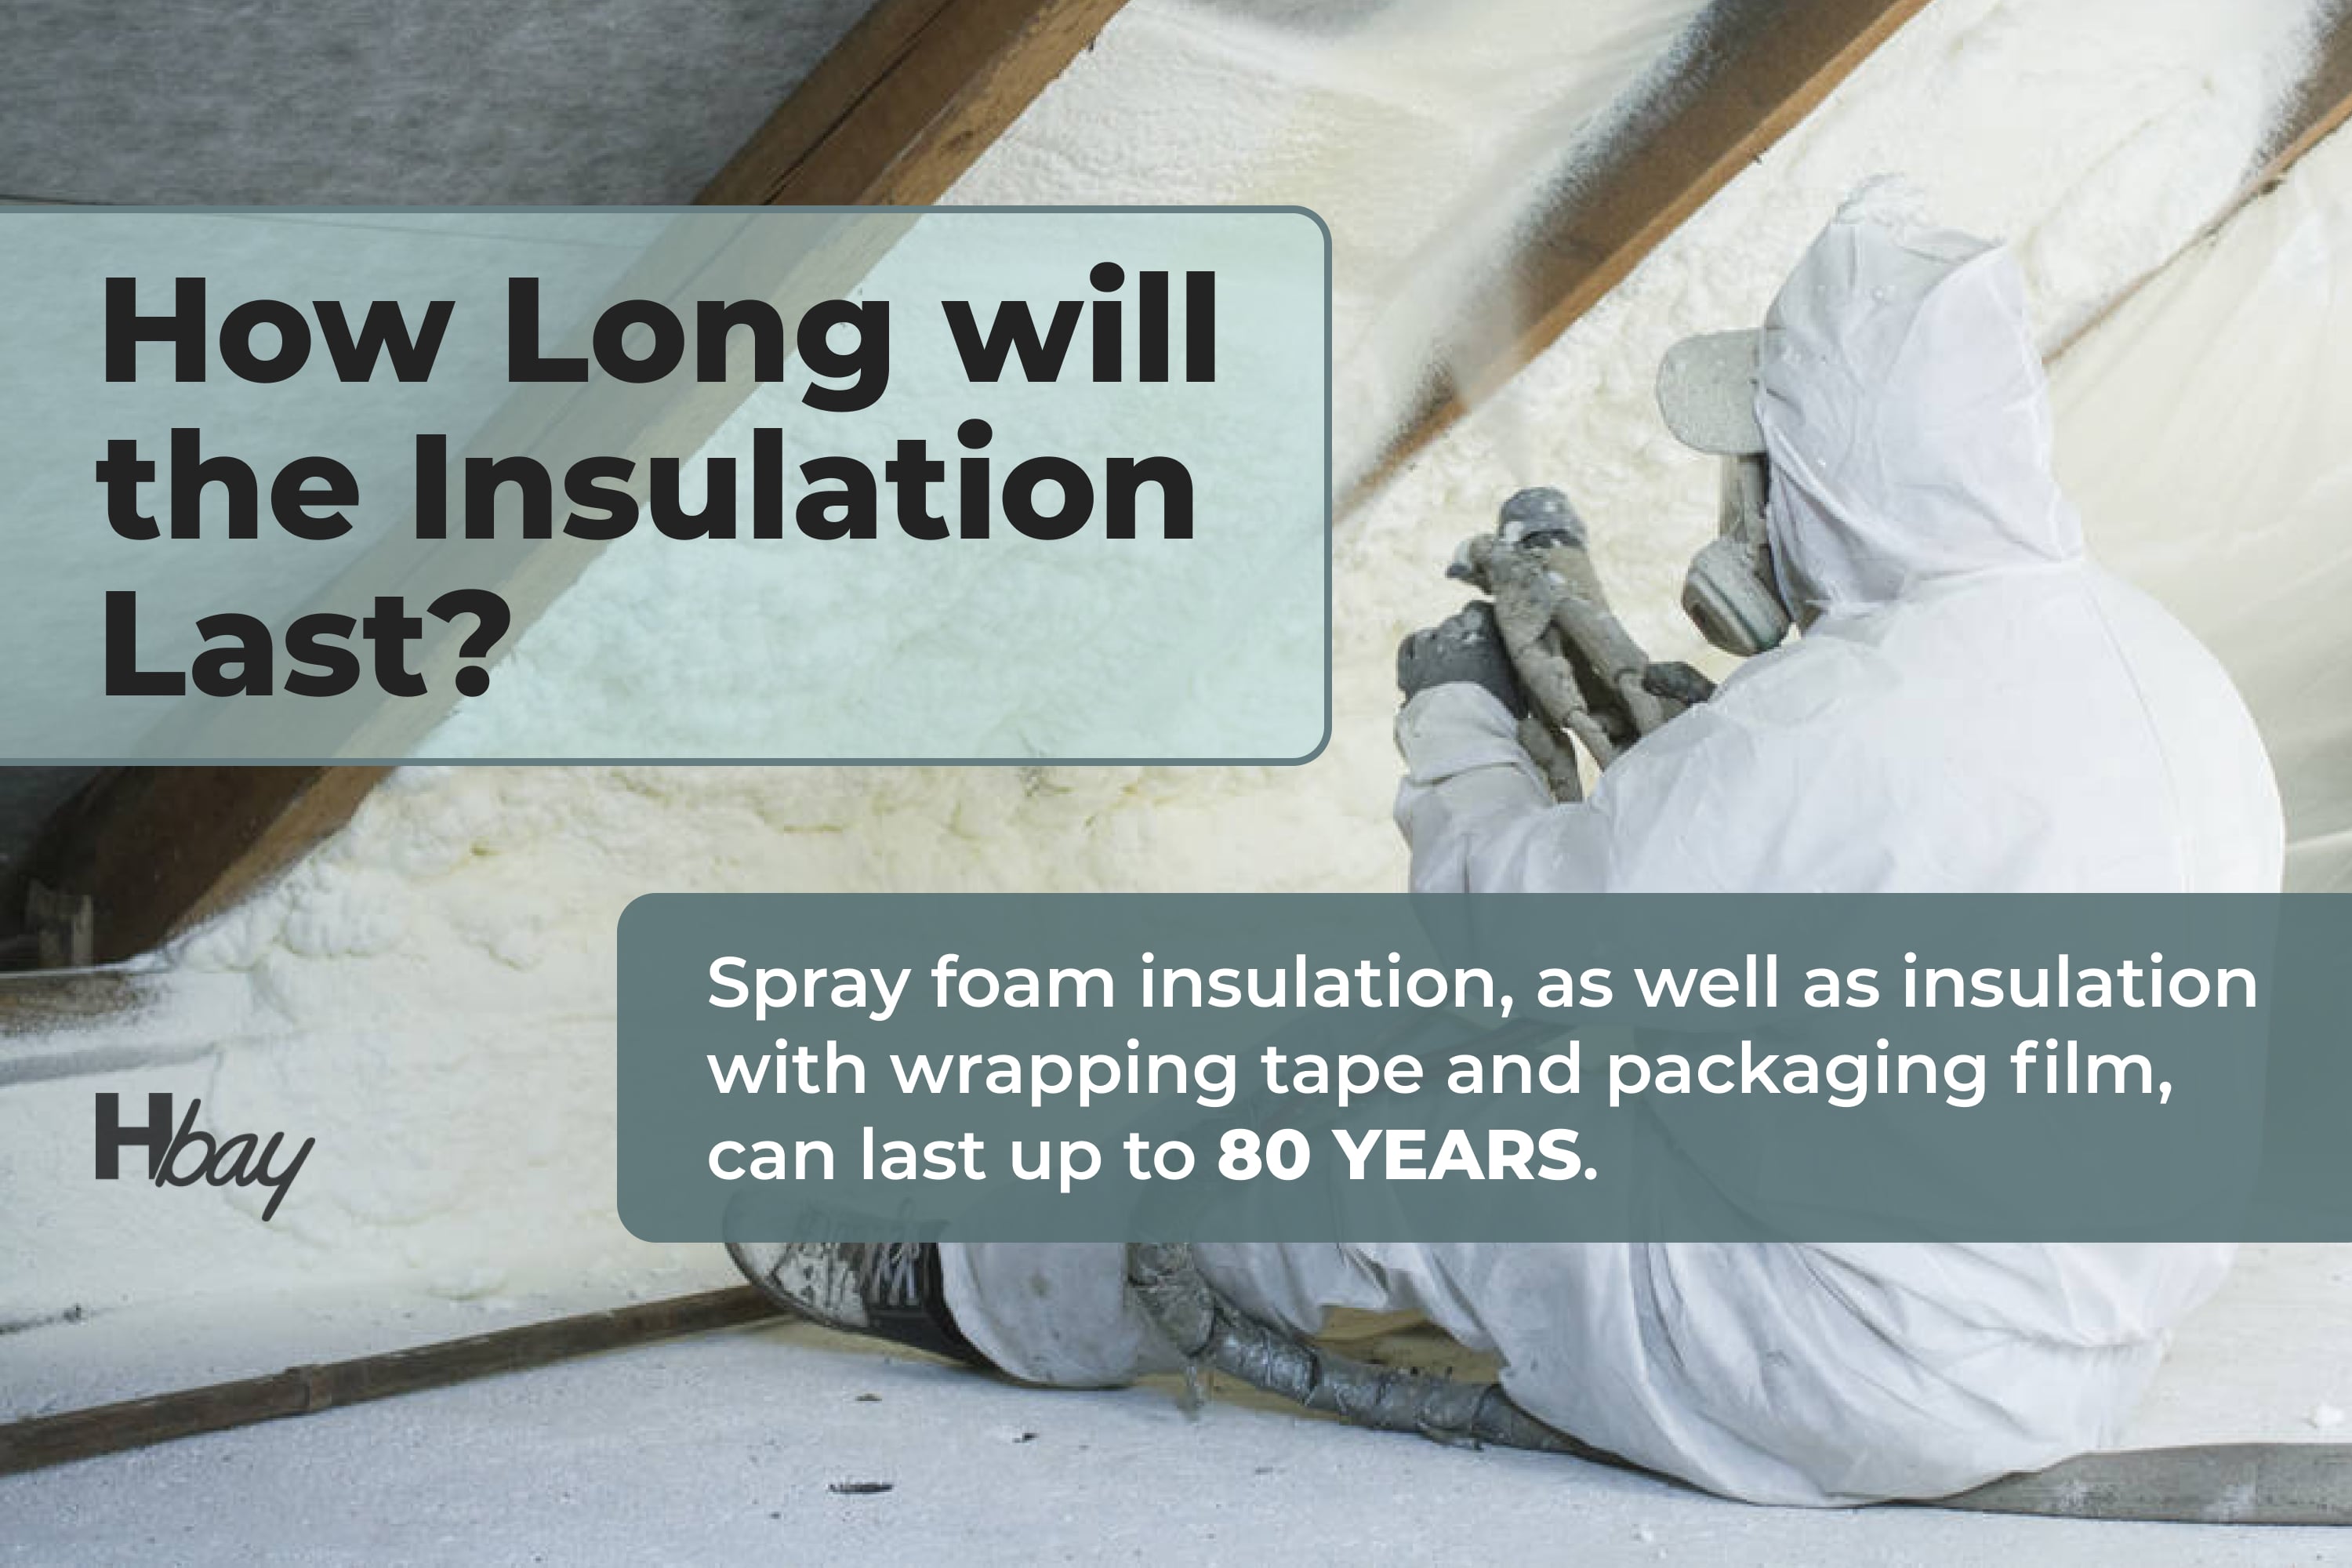 How long will the insulation last